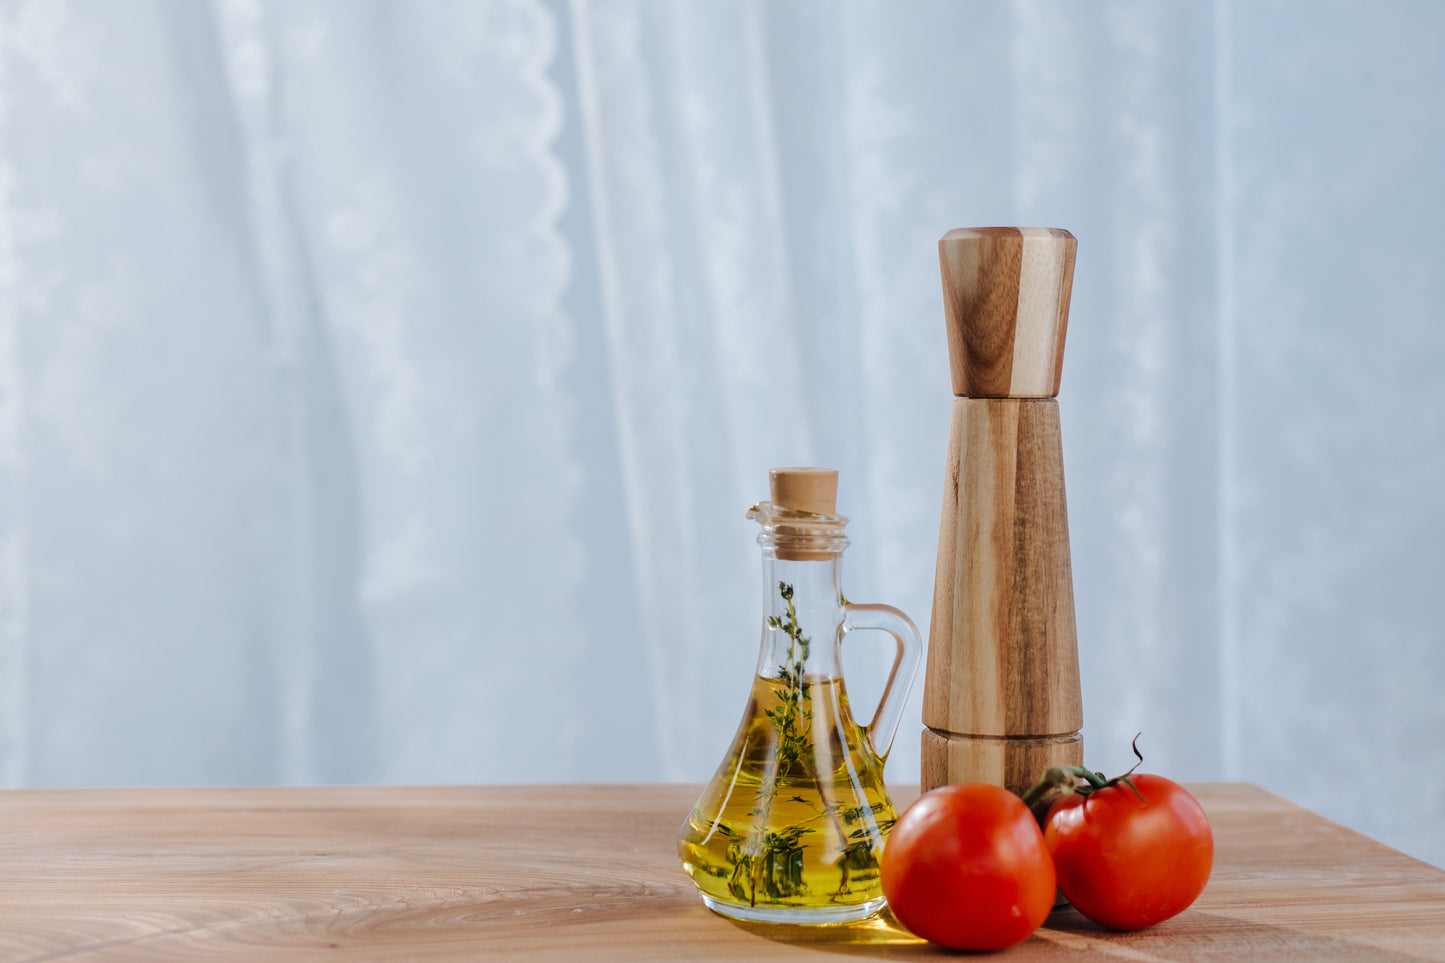 Beware of flavored oilve oils. Try a sprig of rosemary inside the bottle instead.